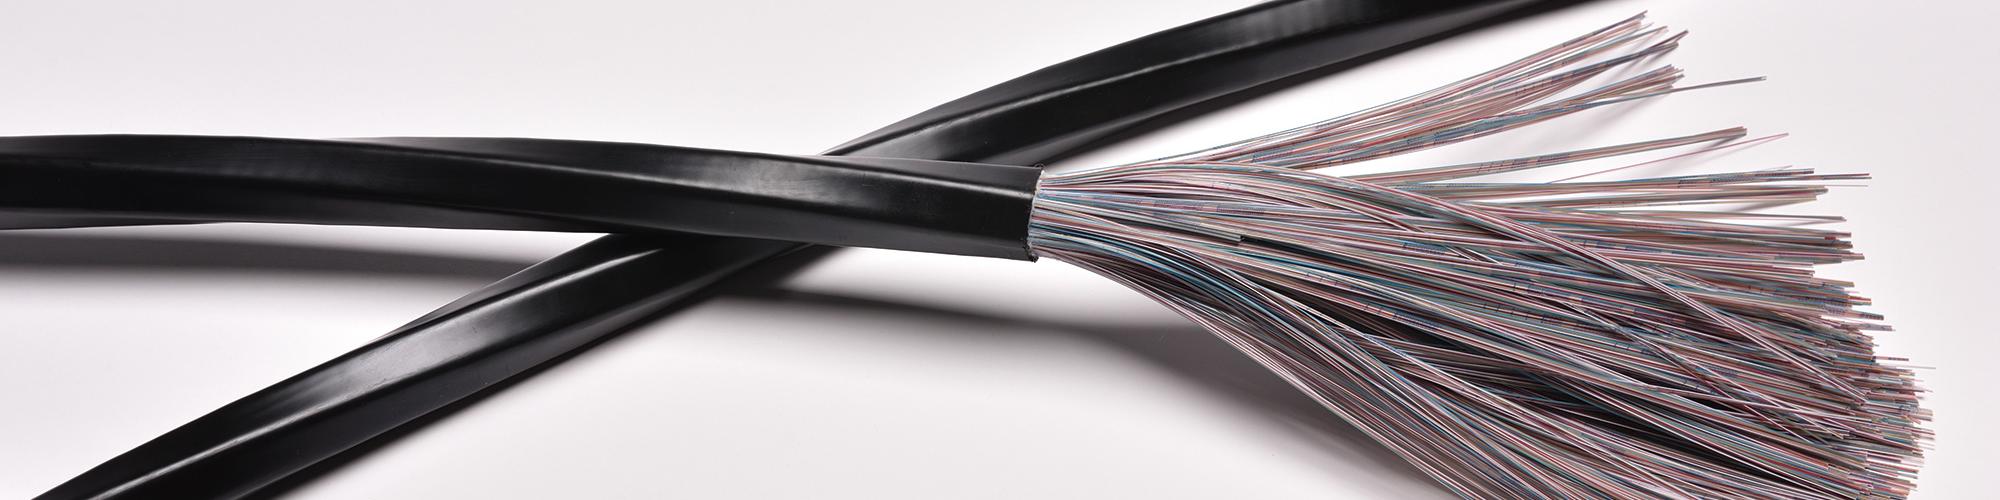 Optical Cables Underpin the Cloud Society — Meeting the needs for larger transmission capacity